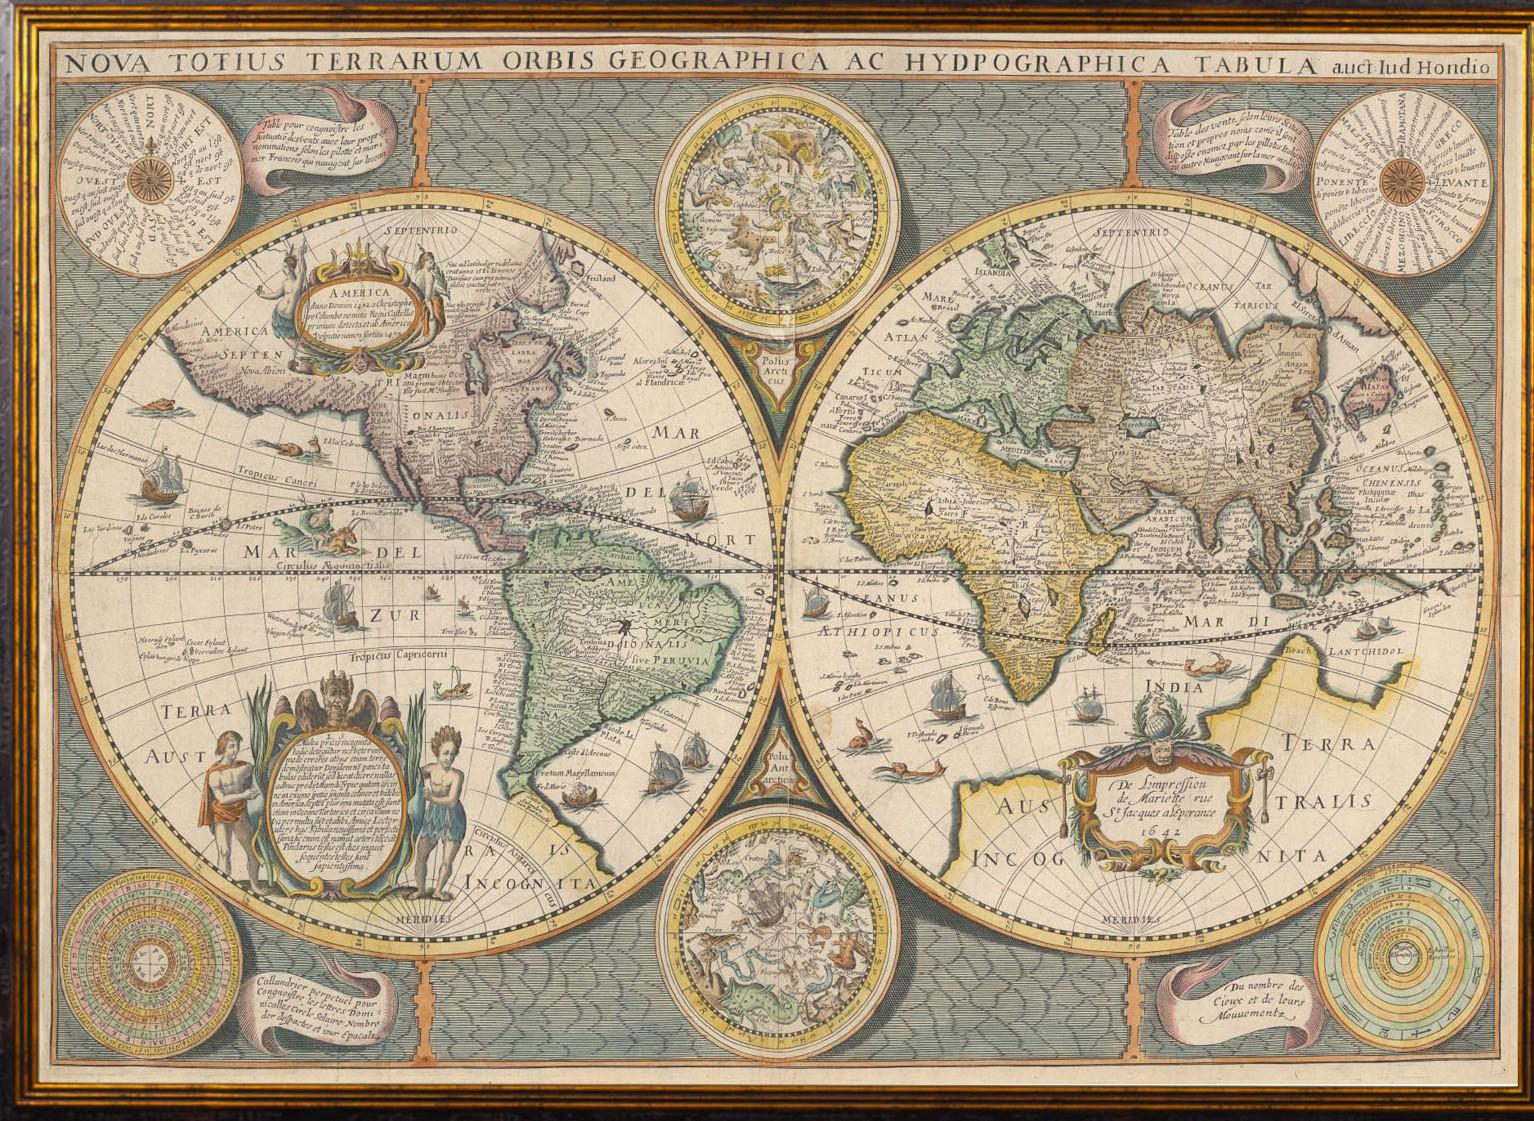 This is a digitally remastered World Map Conjuring up the golden age of exploration, from an original 1642 double hemisphere map of the world. It  includes pictorial relief illustrations and detailed notations from Marco Polo, most notably the place